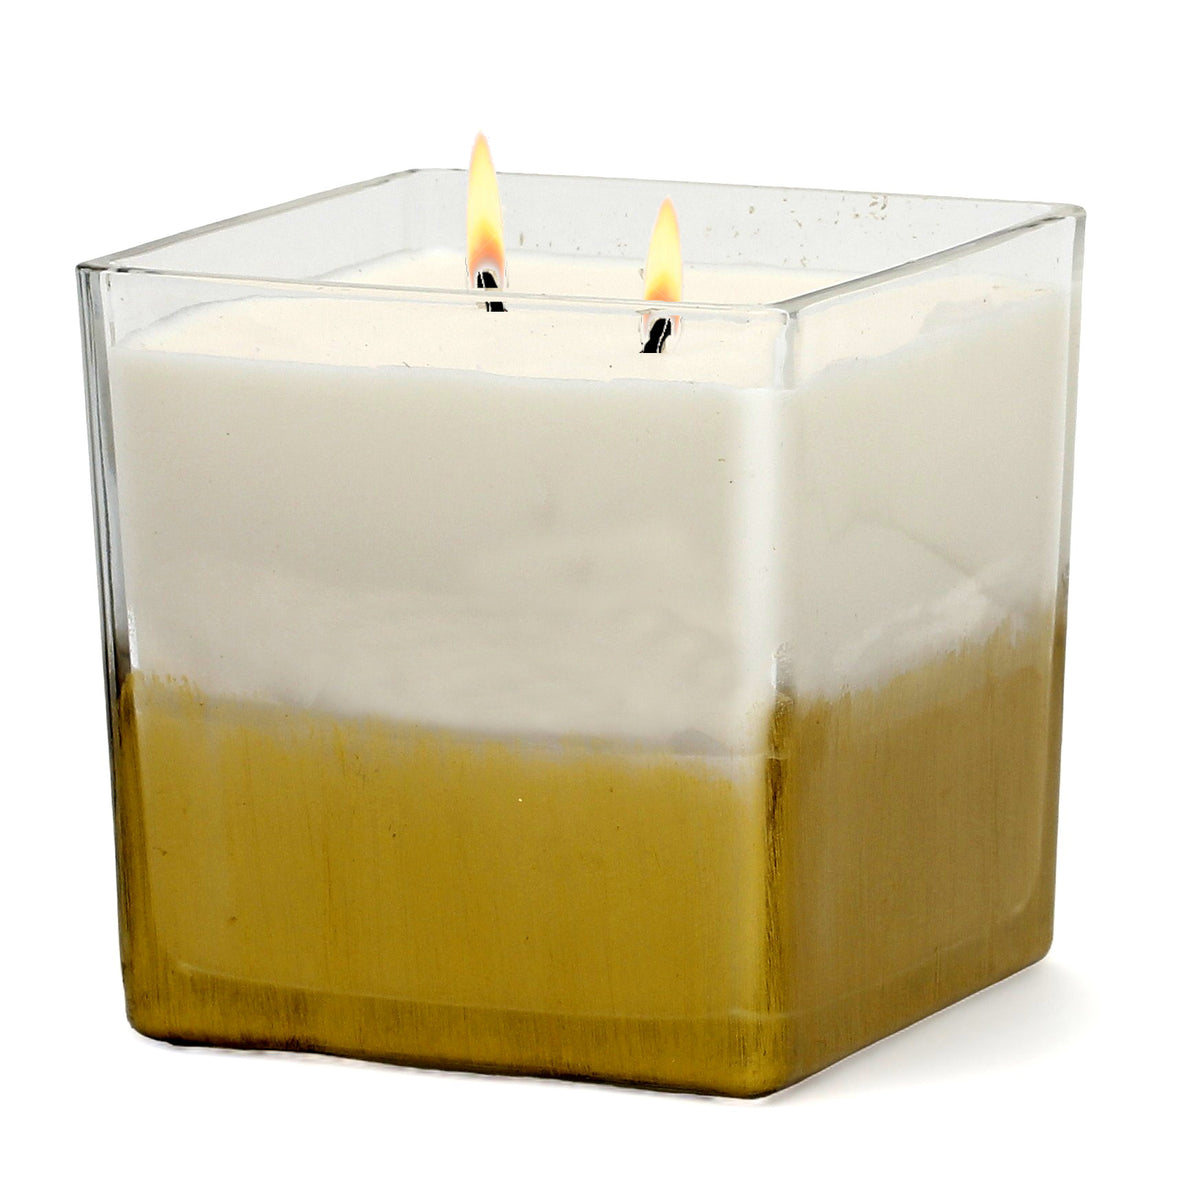 GILDED: Soy Wax Candle with hand painted gold accent. Large square thick glass container